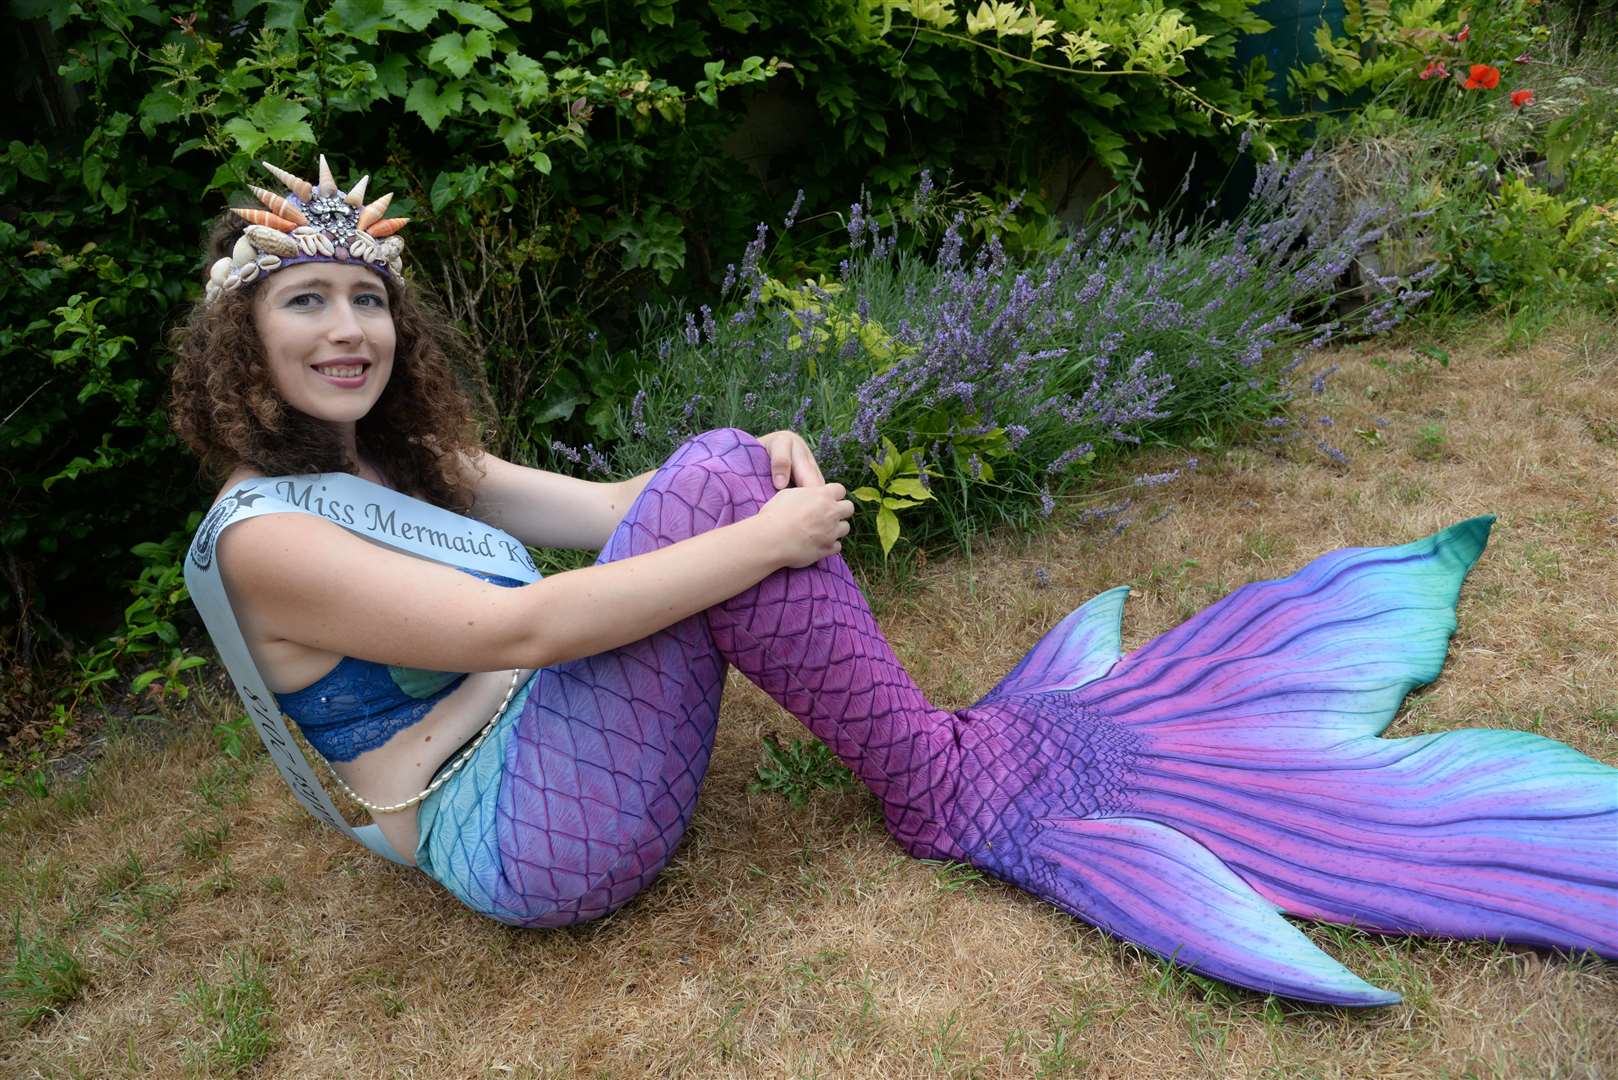 Oceana Pullen of Garlinge Green who will represent Kent in the Miss Mermaid competition. Picture: Chris Davey